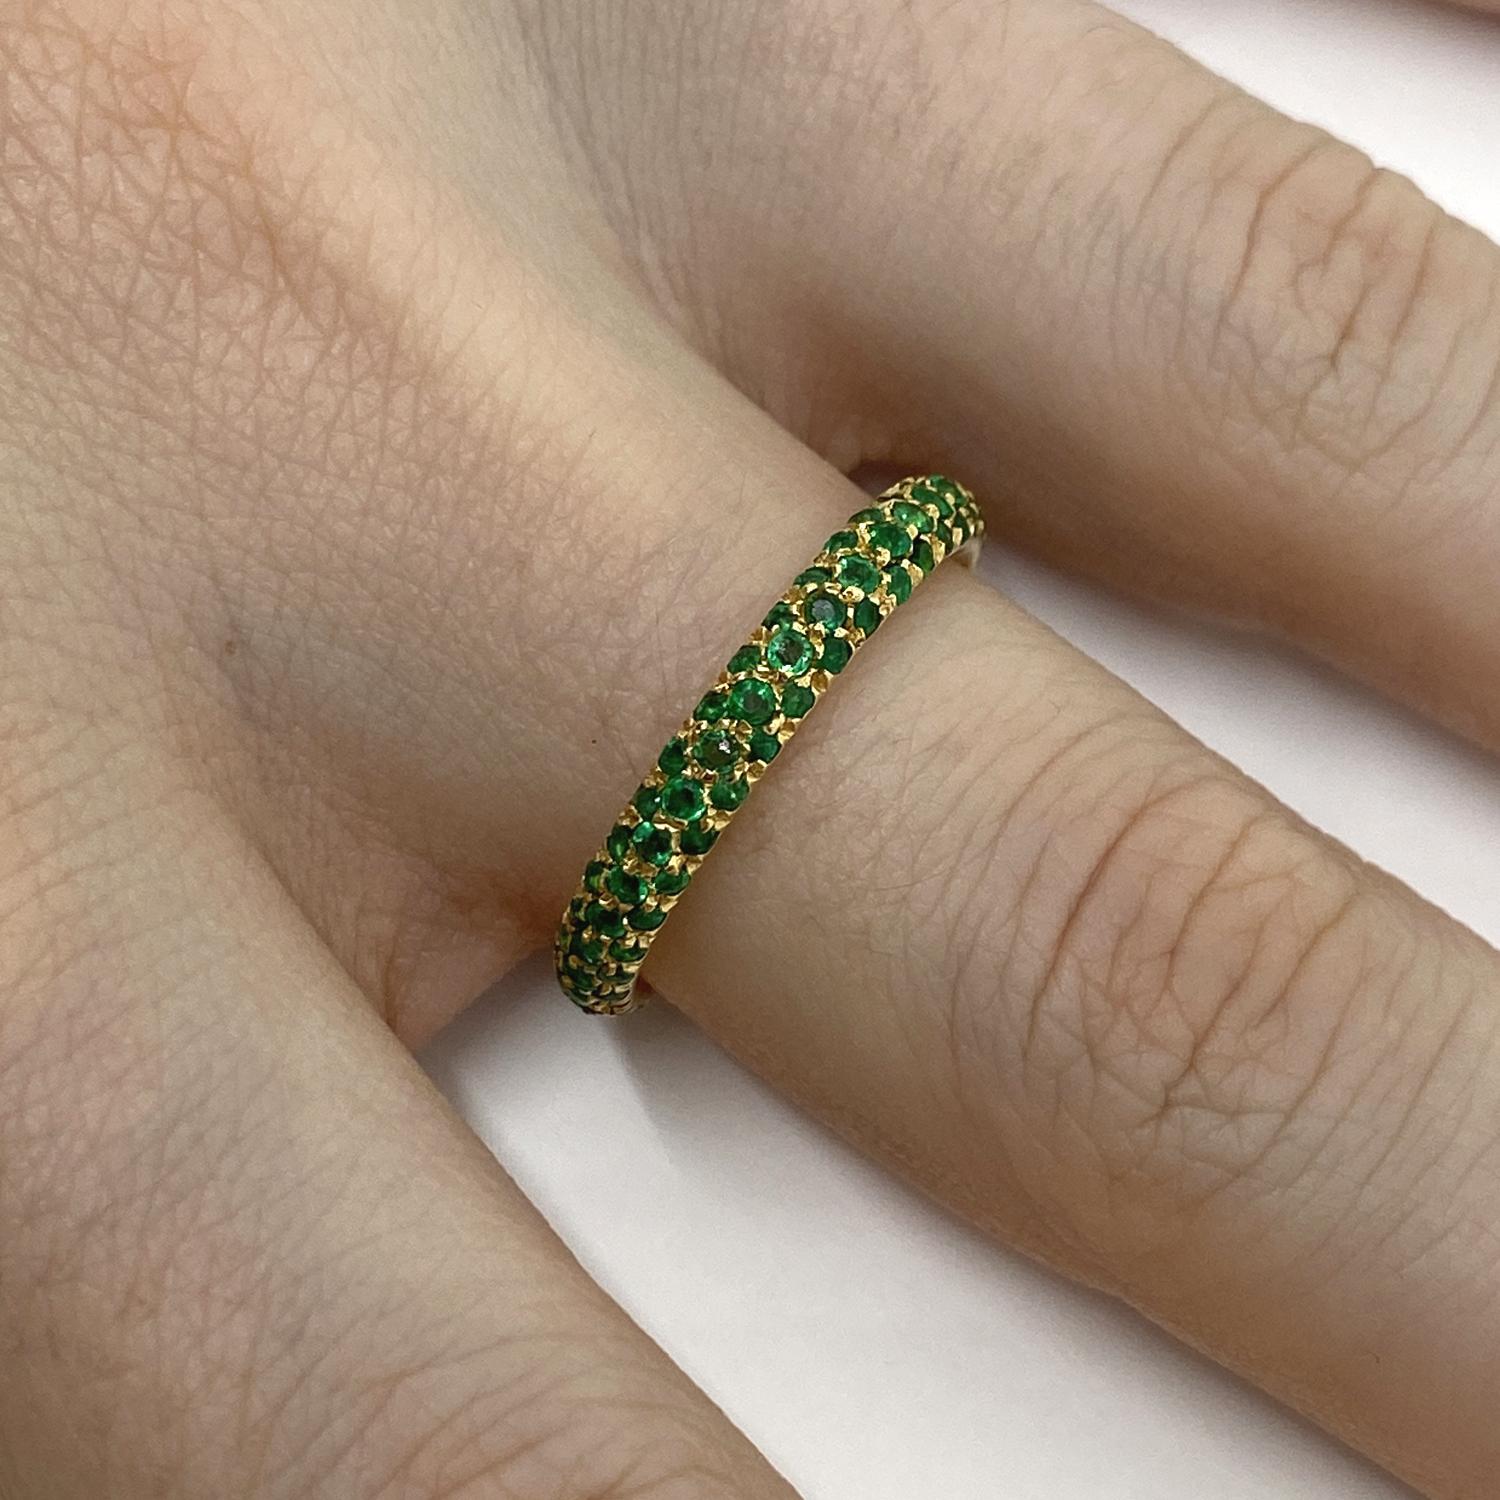 Riviere ring made of 18kt yellow gold with natural tsavorite for ct.1.27

Welcome to our jewelry collection, where every piece tells a story of timeless elegance and unparalleled craftsmanship. As a family-run business in Italy for over 100 years,